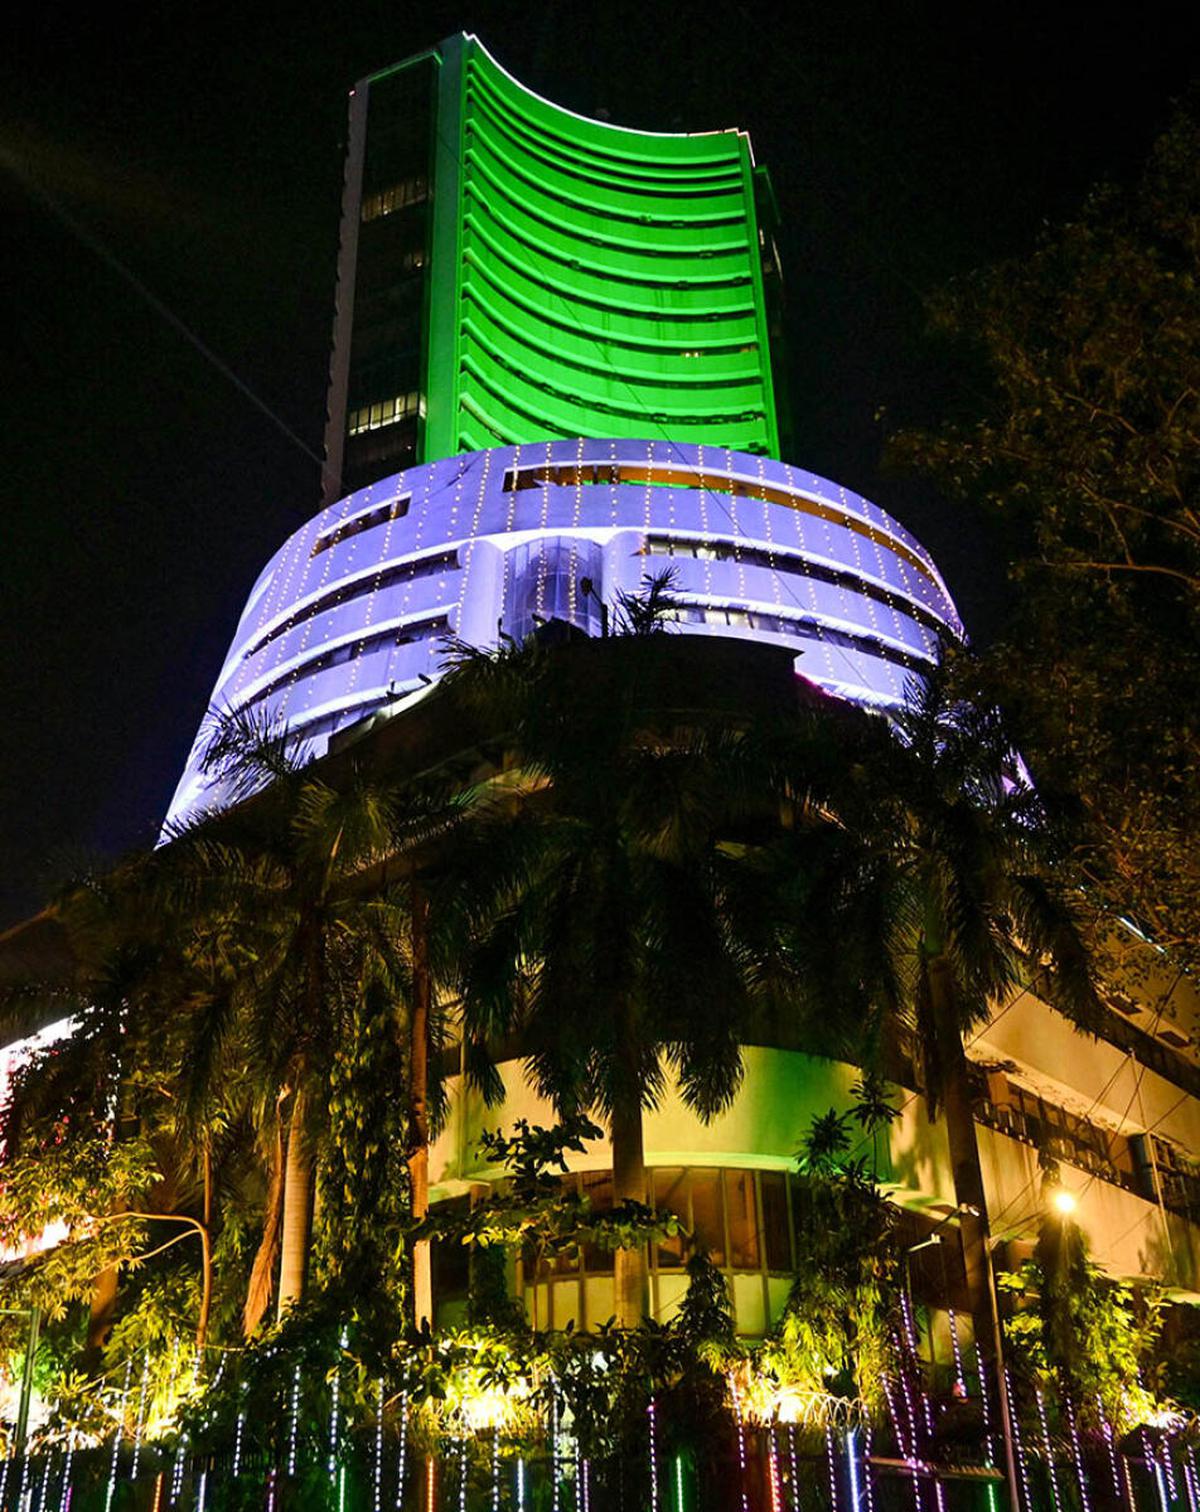 Bombay Stock Exchange (BSE) is illuminated with colourful lights during the Muhurat Trading Bell ceremony on the occasion of the ‘Diwali’ festival, in Mumbai